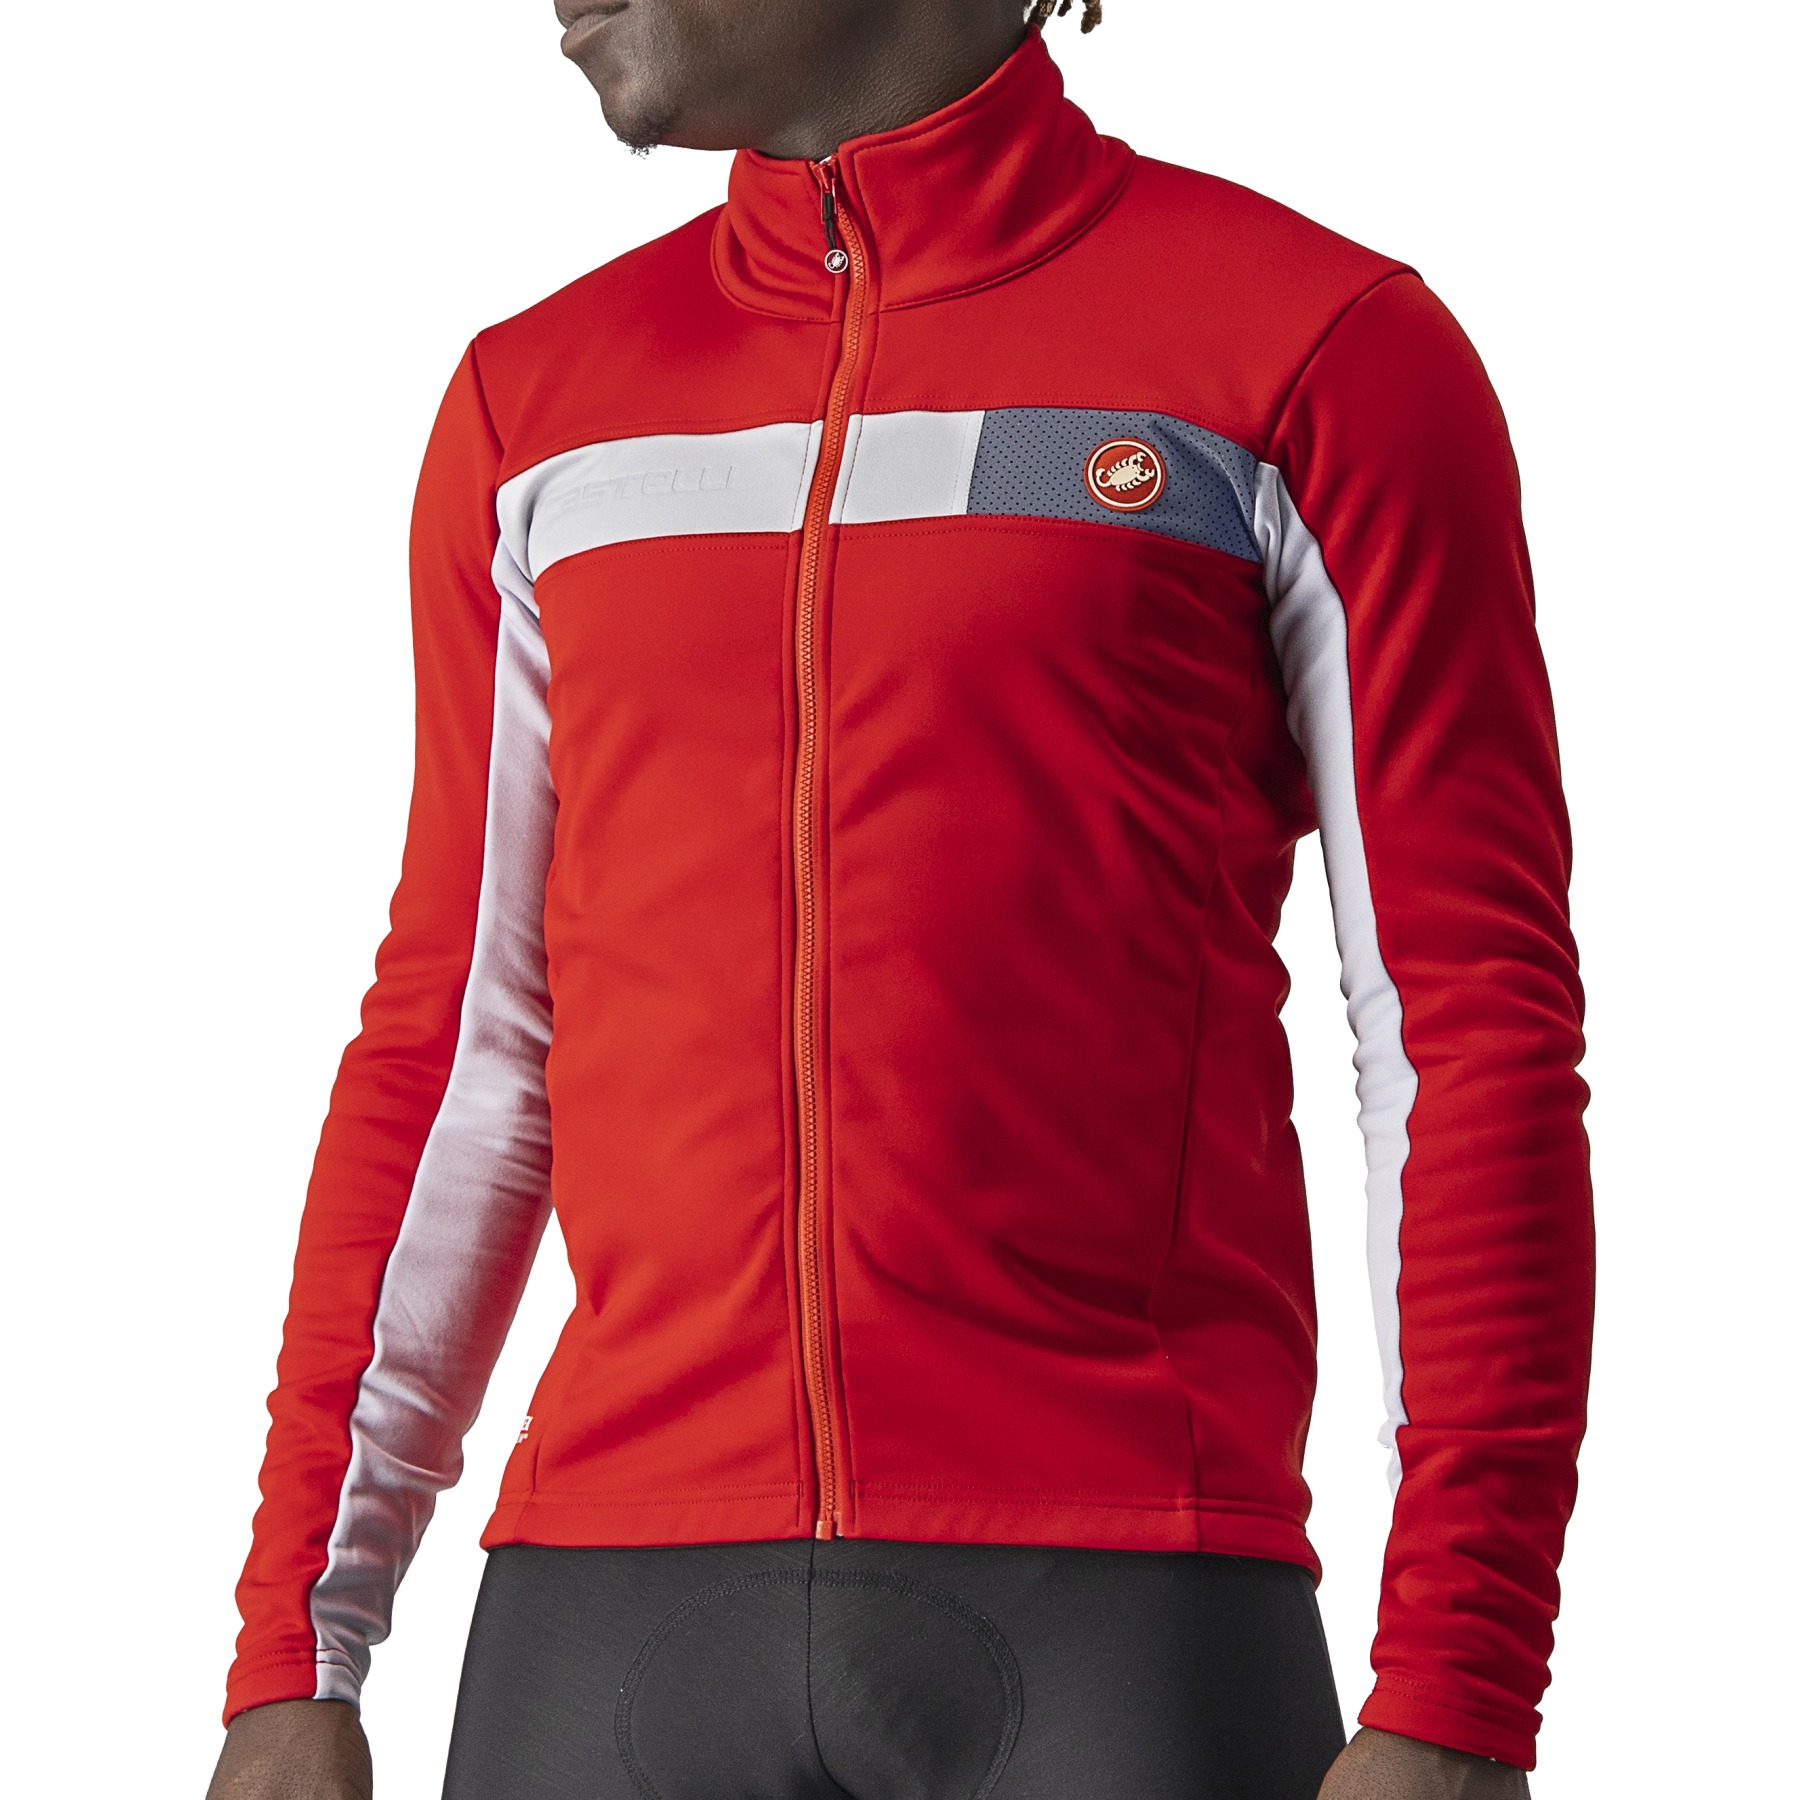 Picture of Castelli Mortirolo 6S Jacket - red/silver grey-silver reflex 023